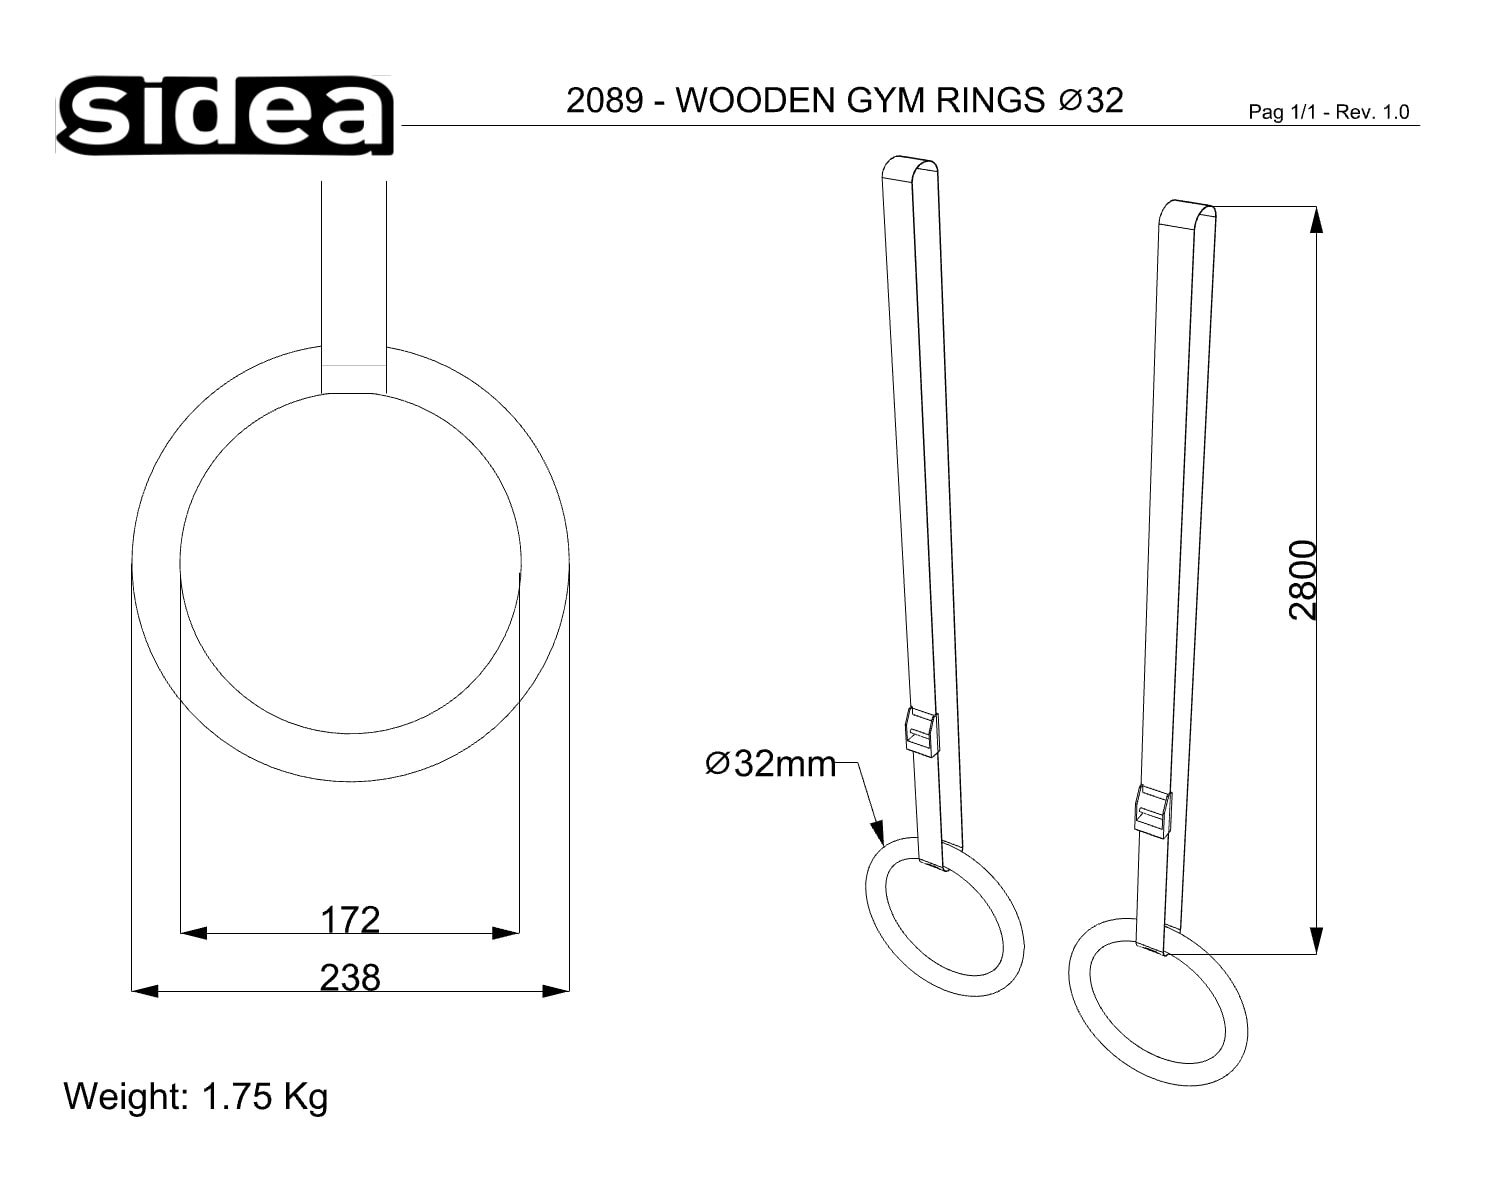 2089 - Wooden Gym Rings D32